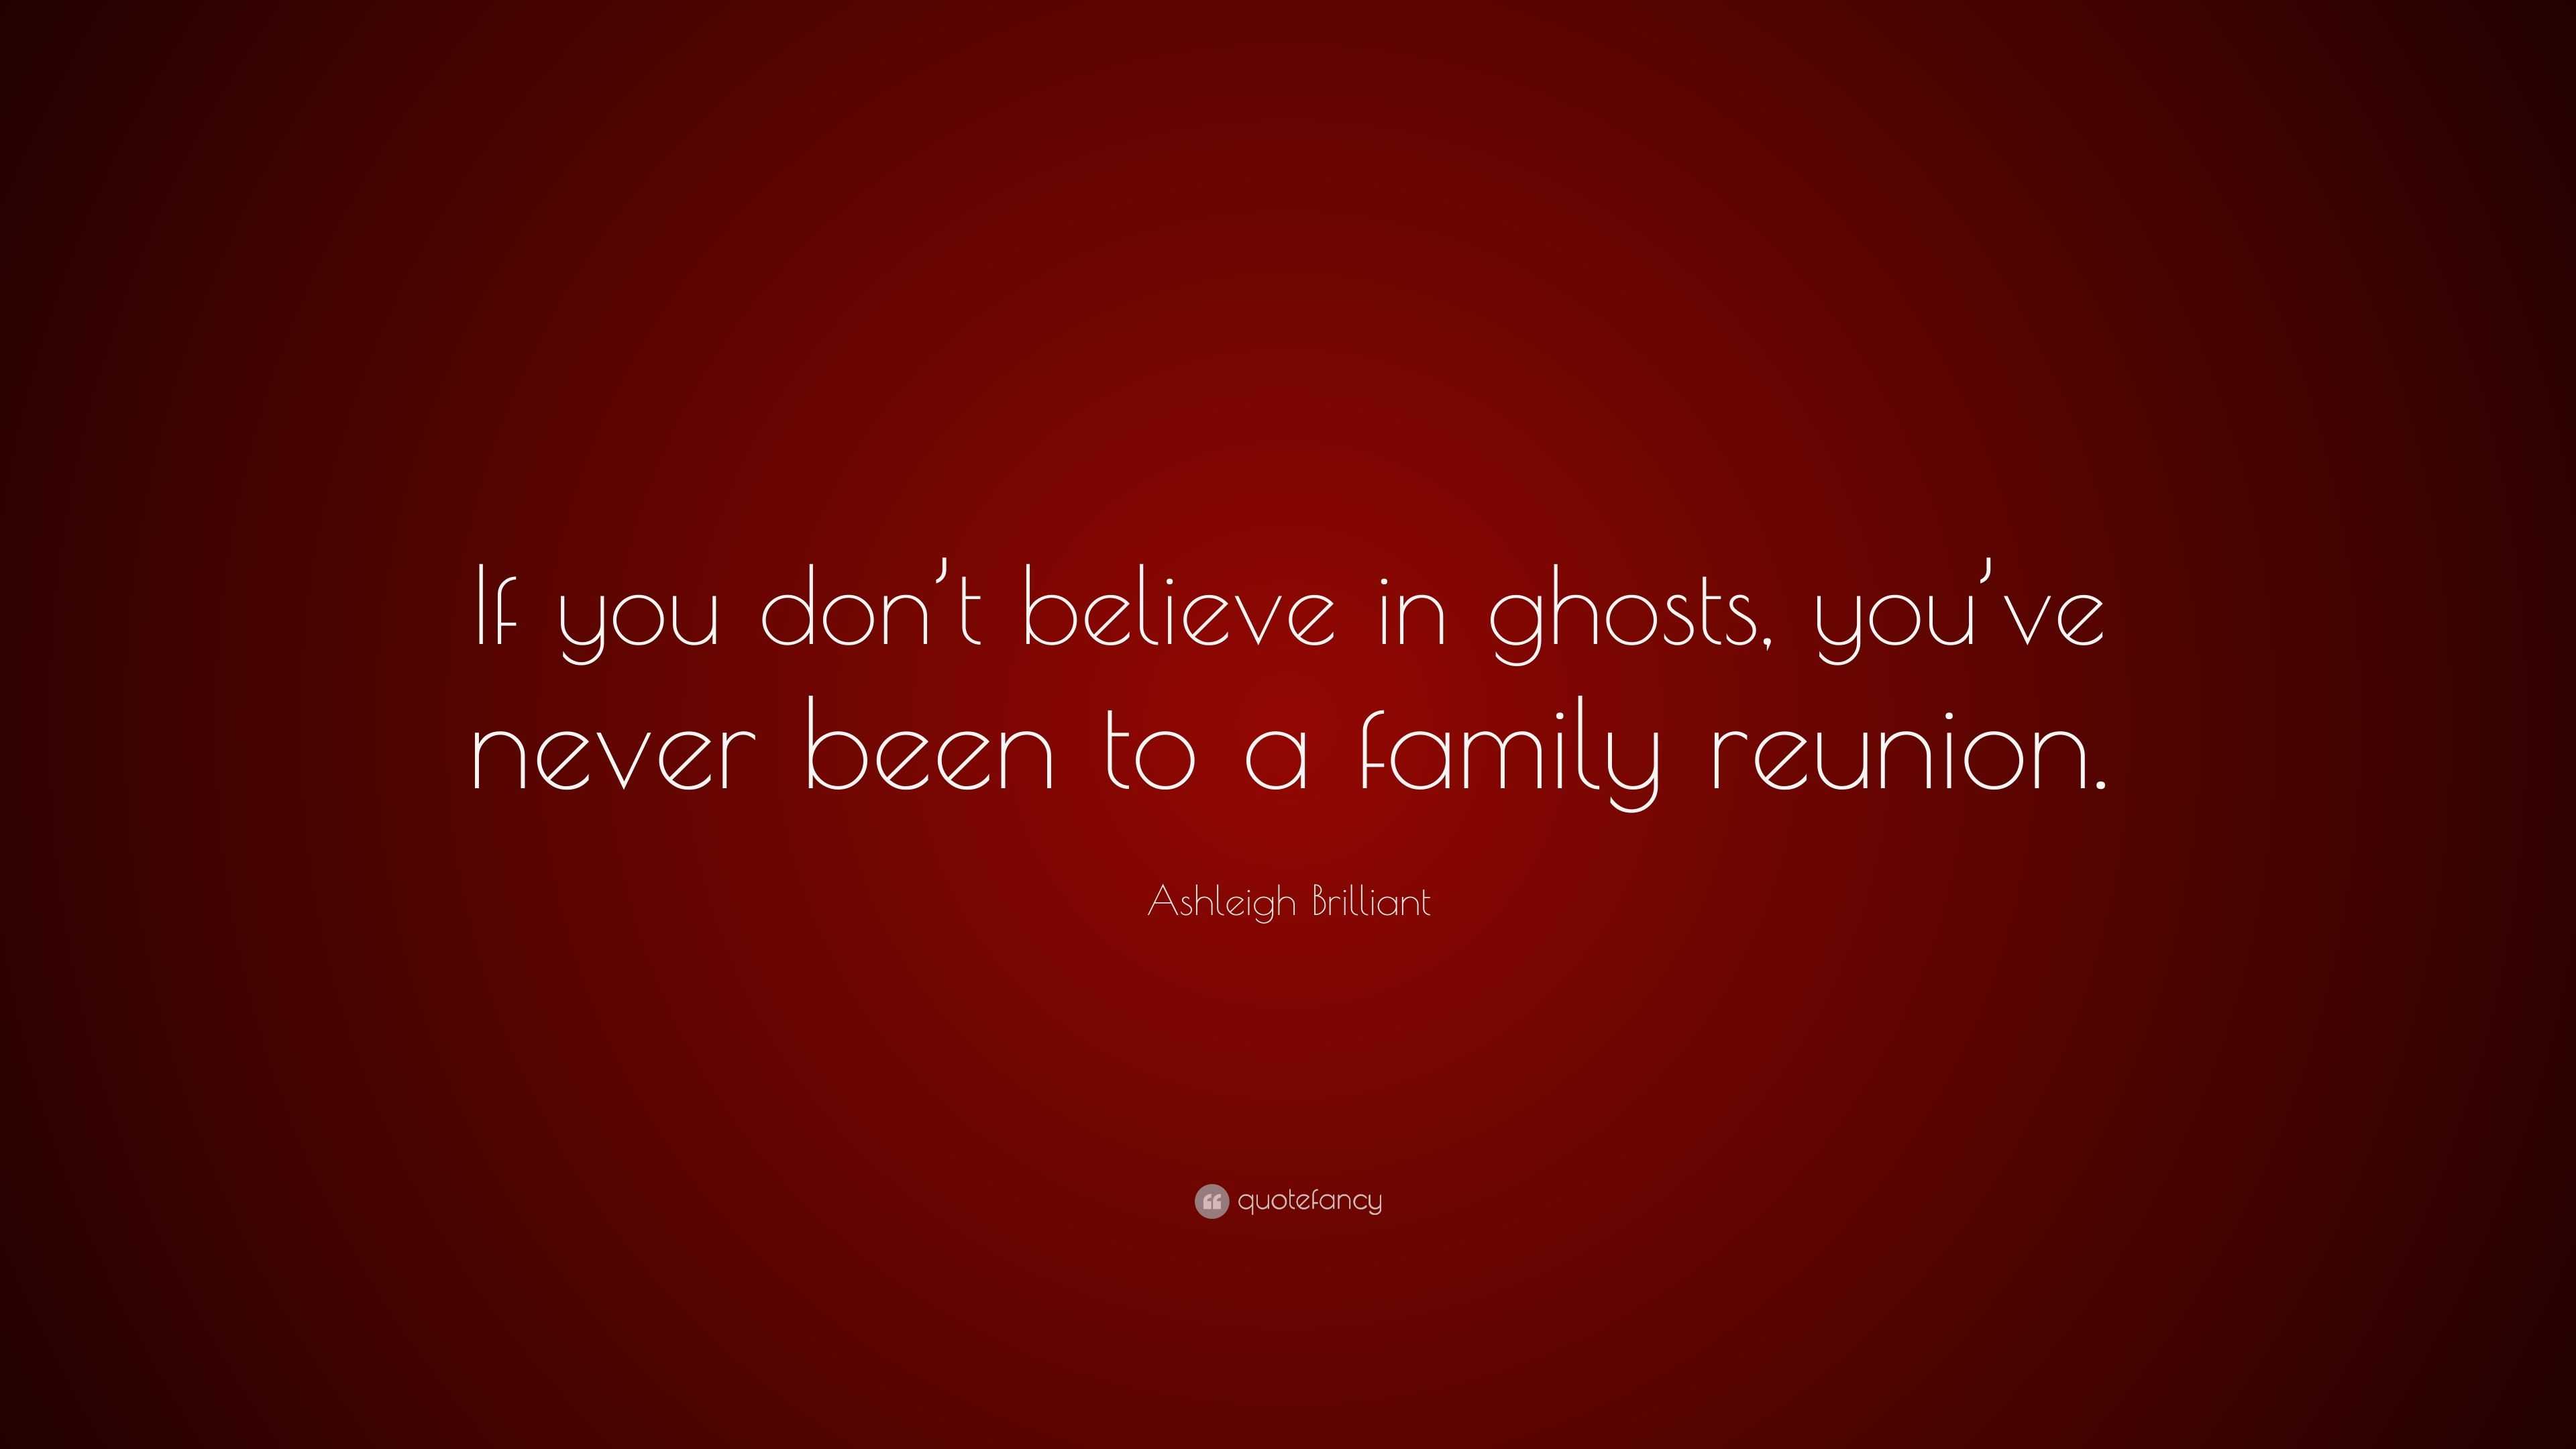 Ashleigh Brilliant Quote: “If you don’t believe in ghosts, you’ve never ...